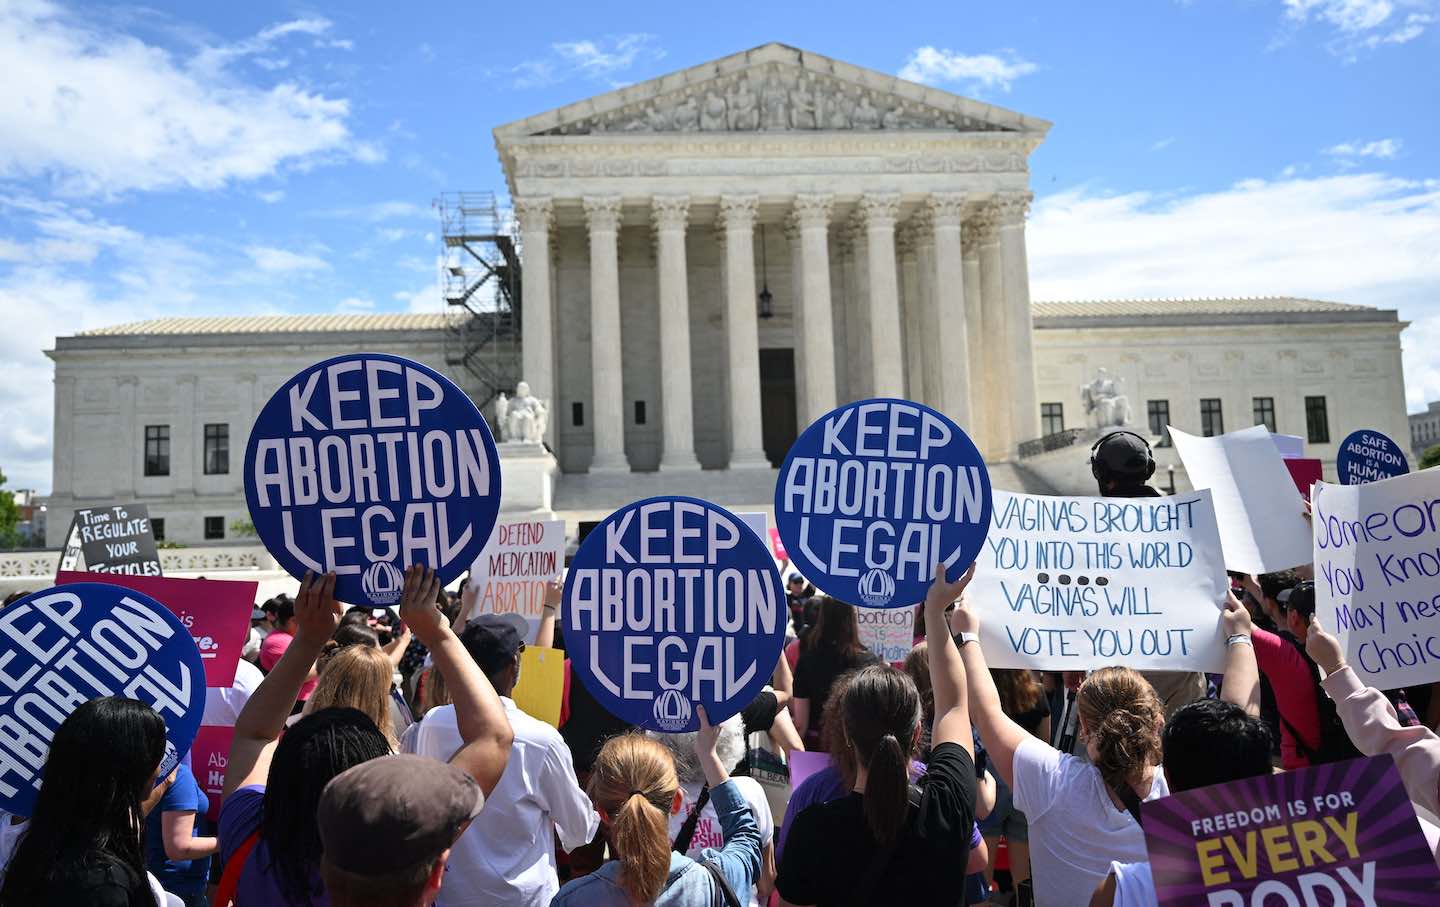 Demonstrators rally in support of abortion rights at the US Supreme Court in Washington, D.C., on April 15, 2023.